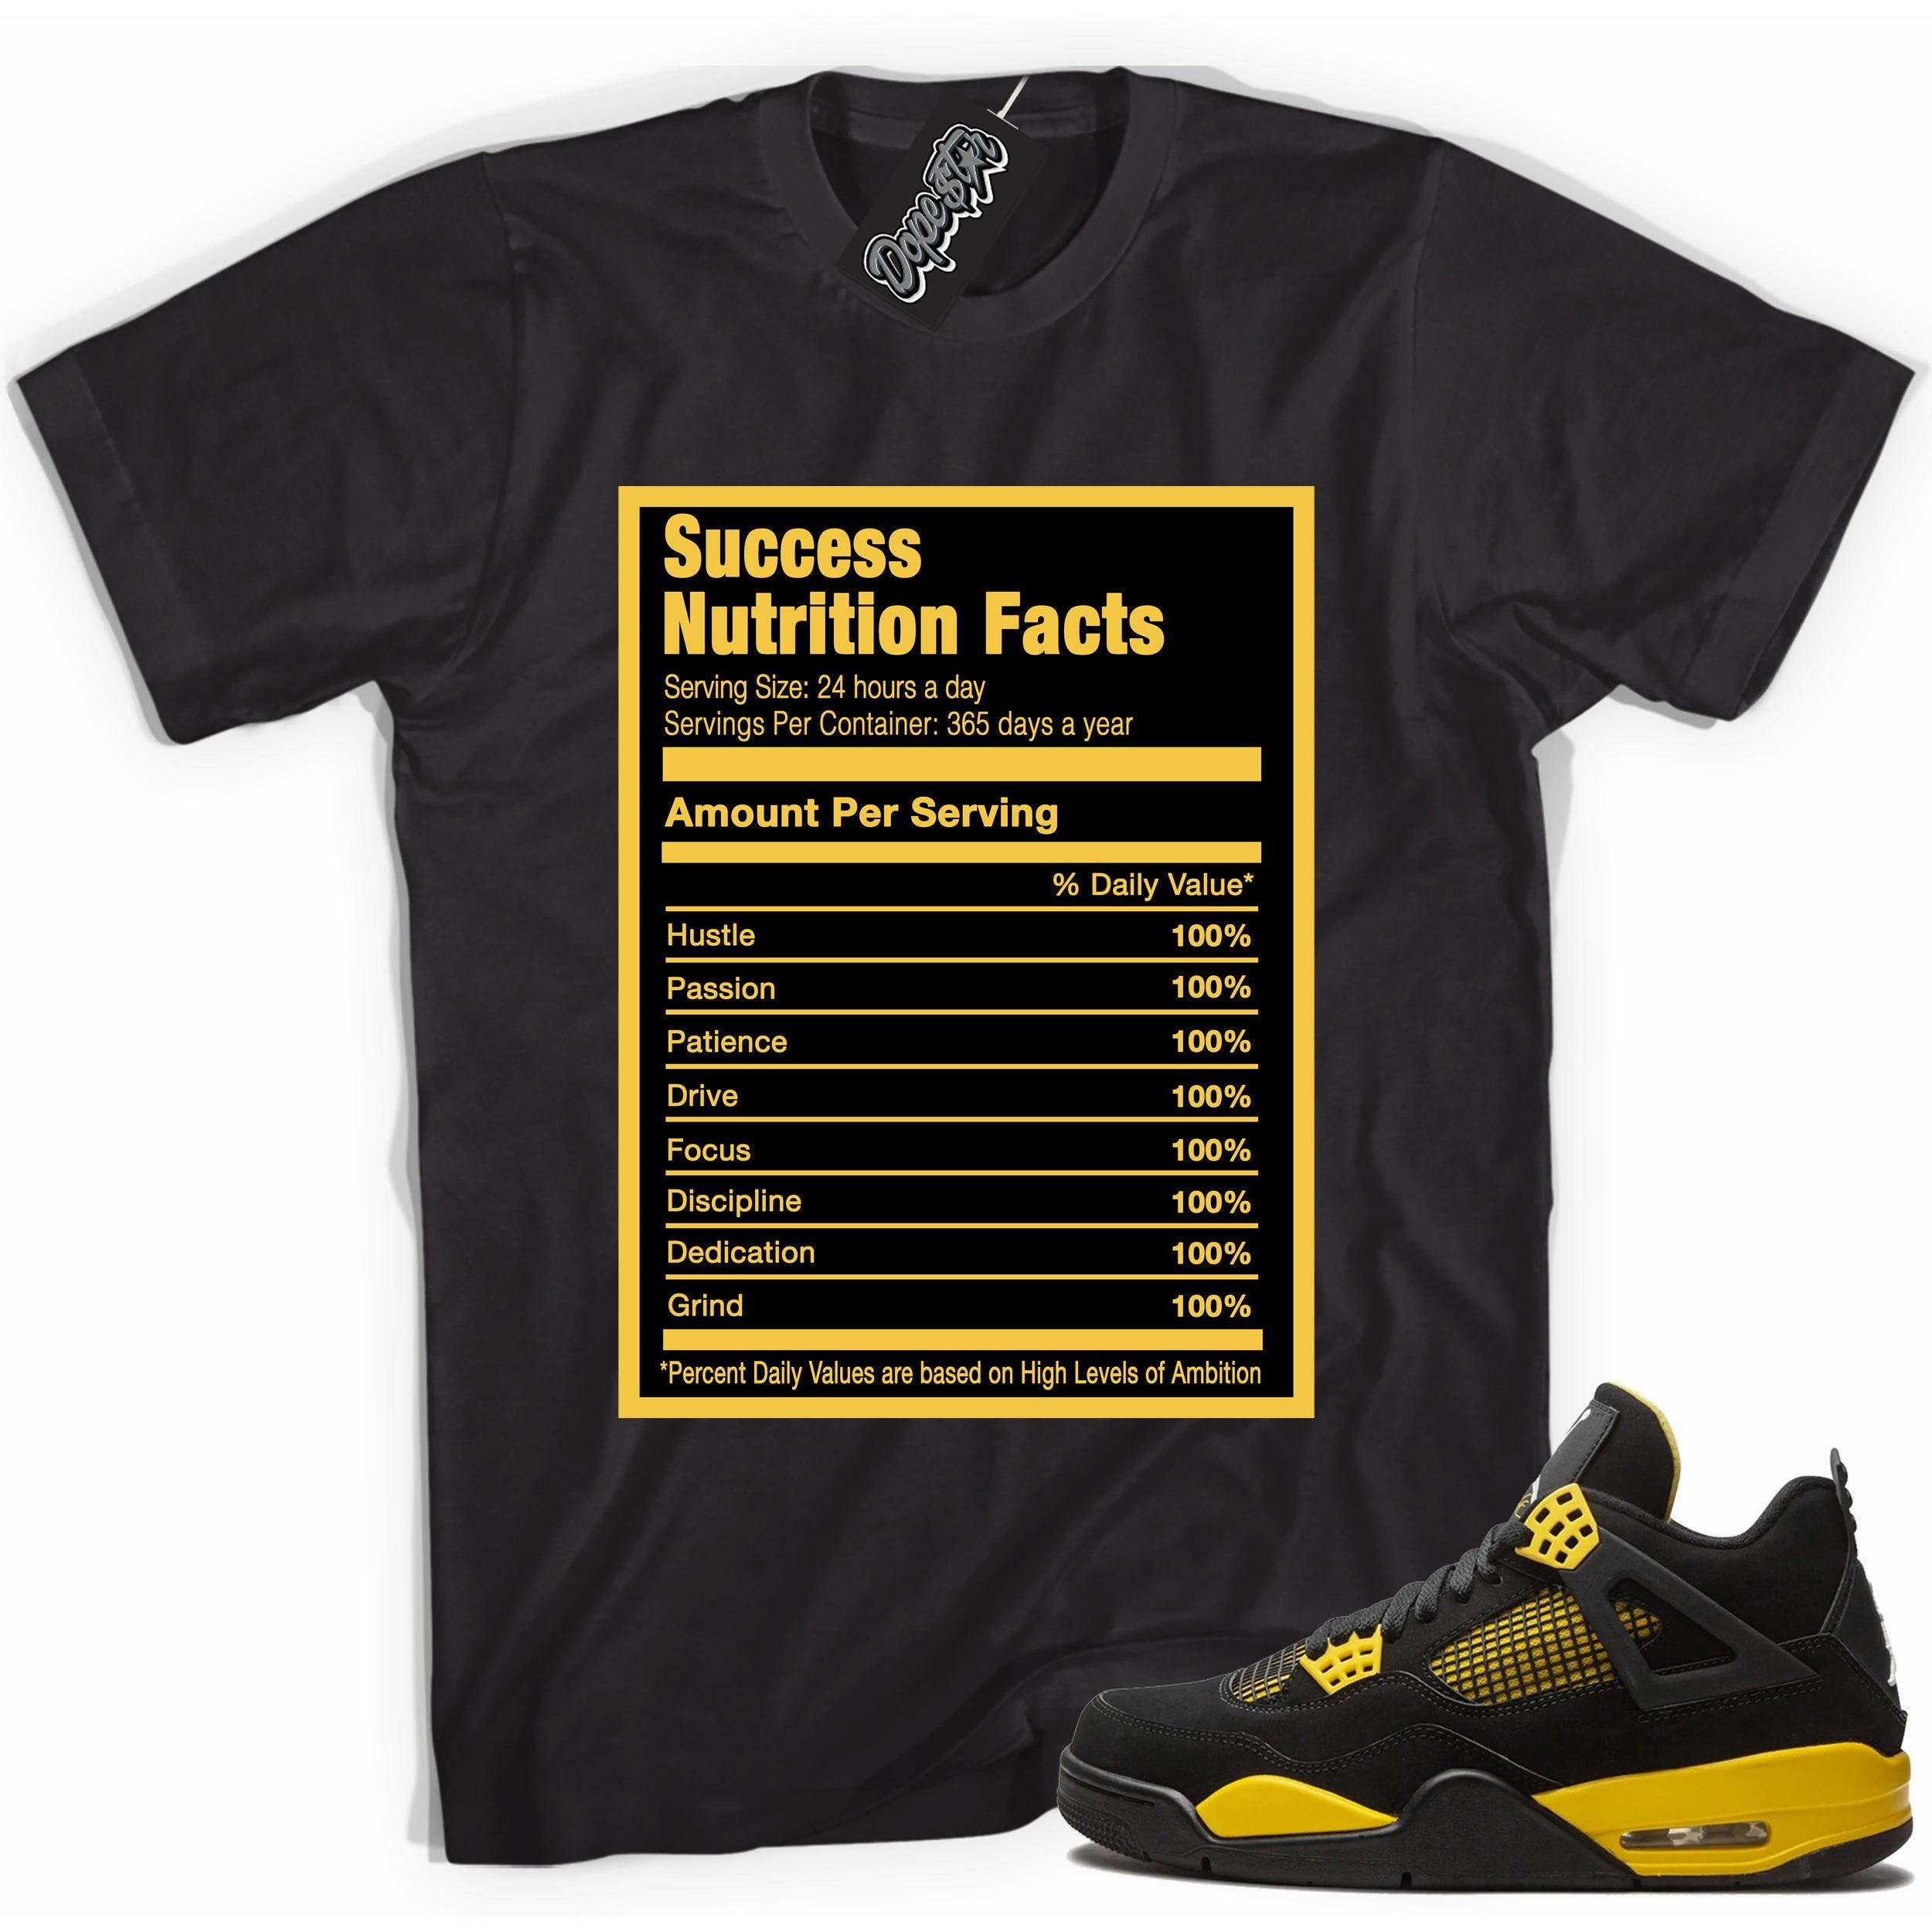 Cool black graphic tee with 'success nutrition facts' print, that perfectly matches  Air Jordan 4 Thunder sneakers